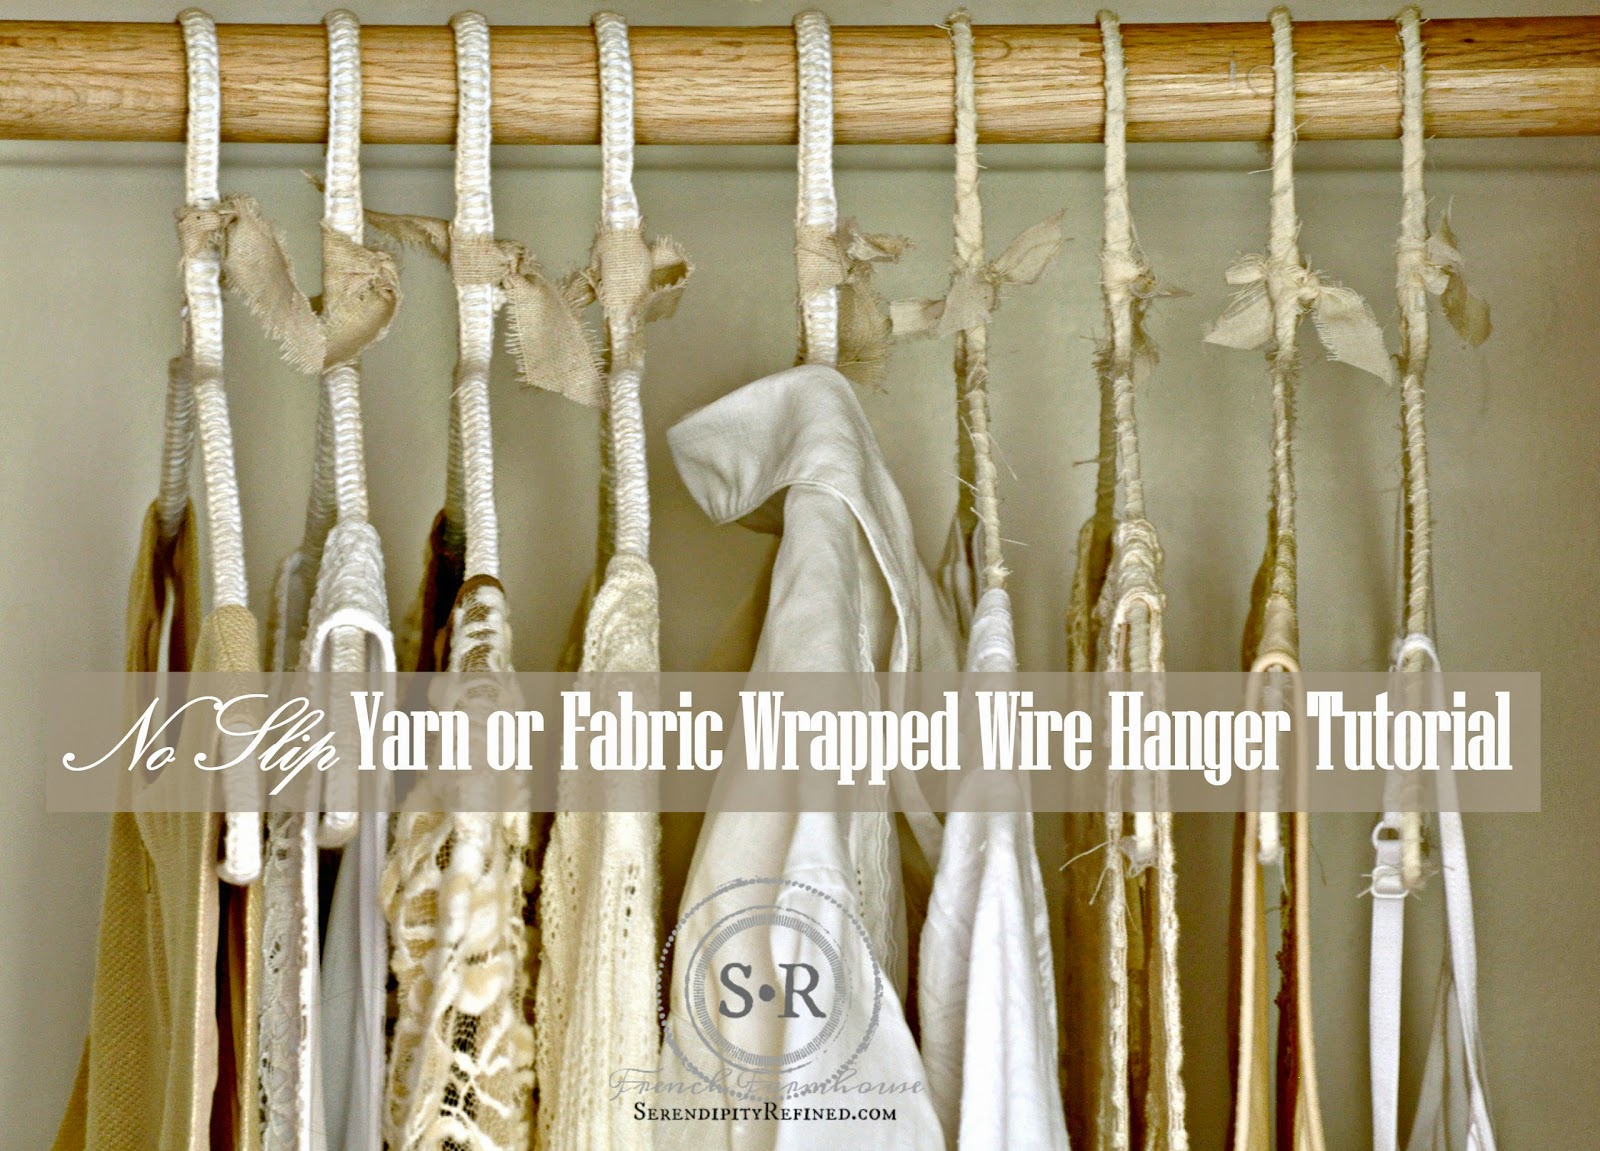 Serendipity Refined Blog: Non-Slip Yarn and Cloth Covered Hanger Tutorial  and a Story About Closets